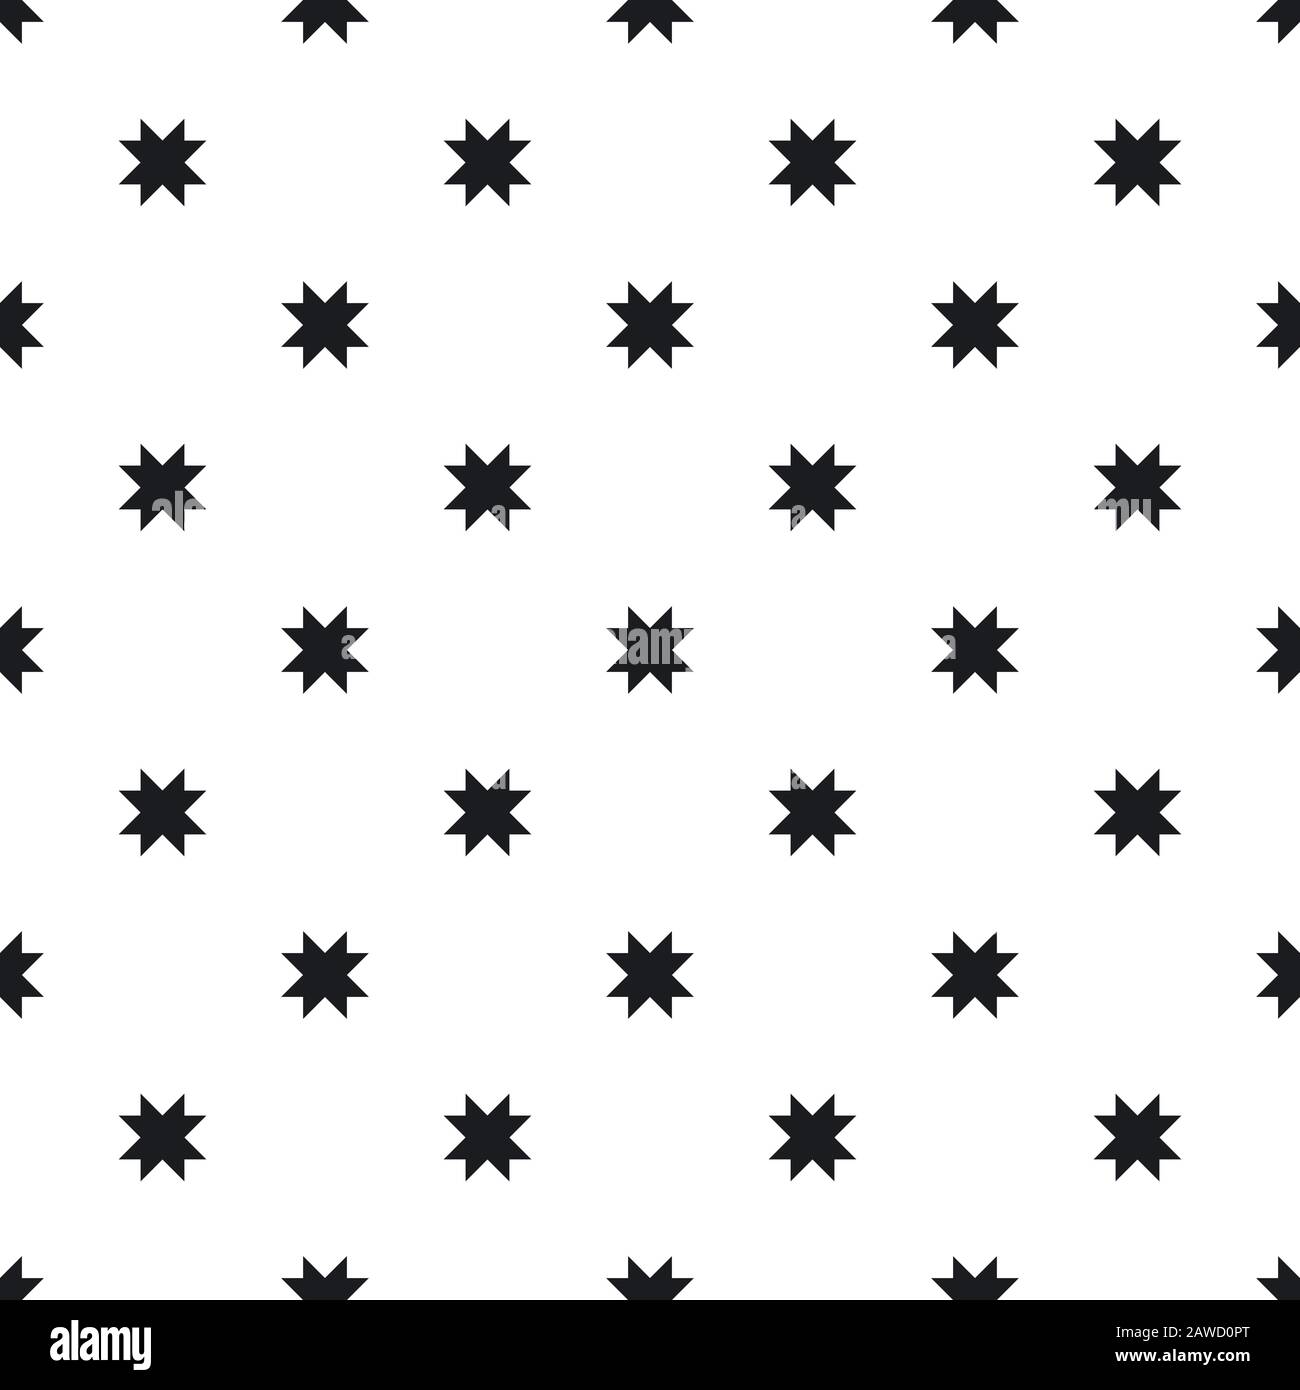 Seamless pattern. Stars ornament. Folk backdrop. Tribe motif. Ethnic background. Ancient mosaic. Tribal wallpaper. Ethnical image. Vector art work for Stock Vector